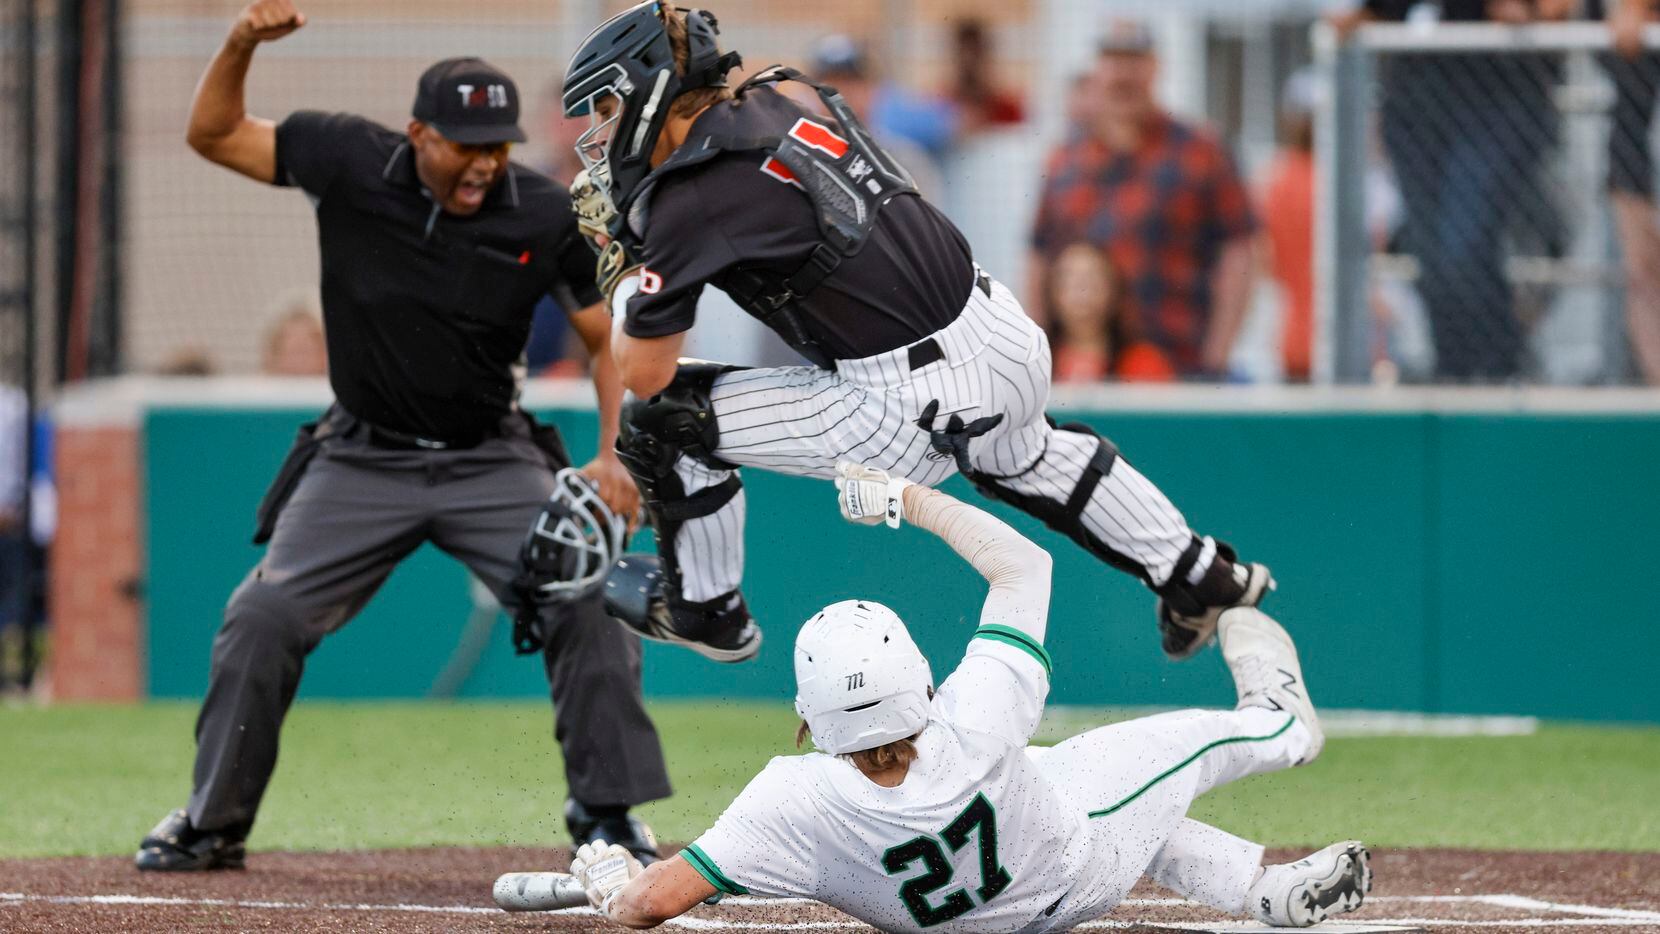 Waxahachie designated hitter Chase Pope (27) collides with Rockwall catcher Jake Overstreet...